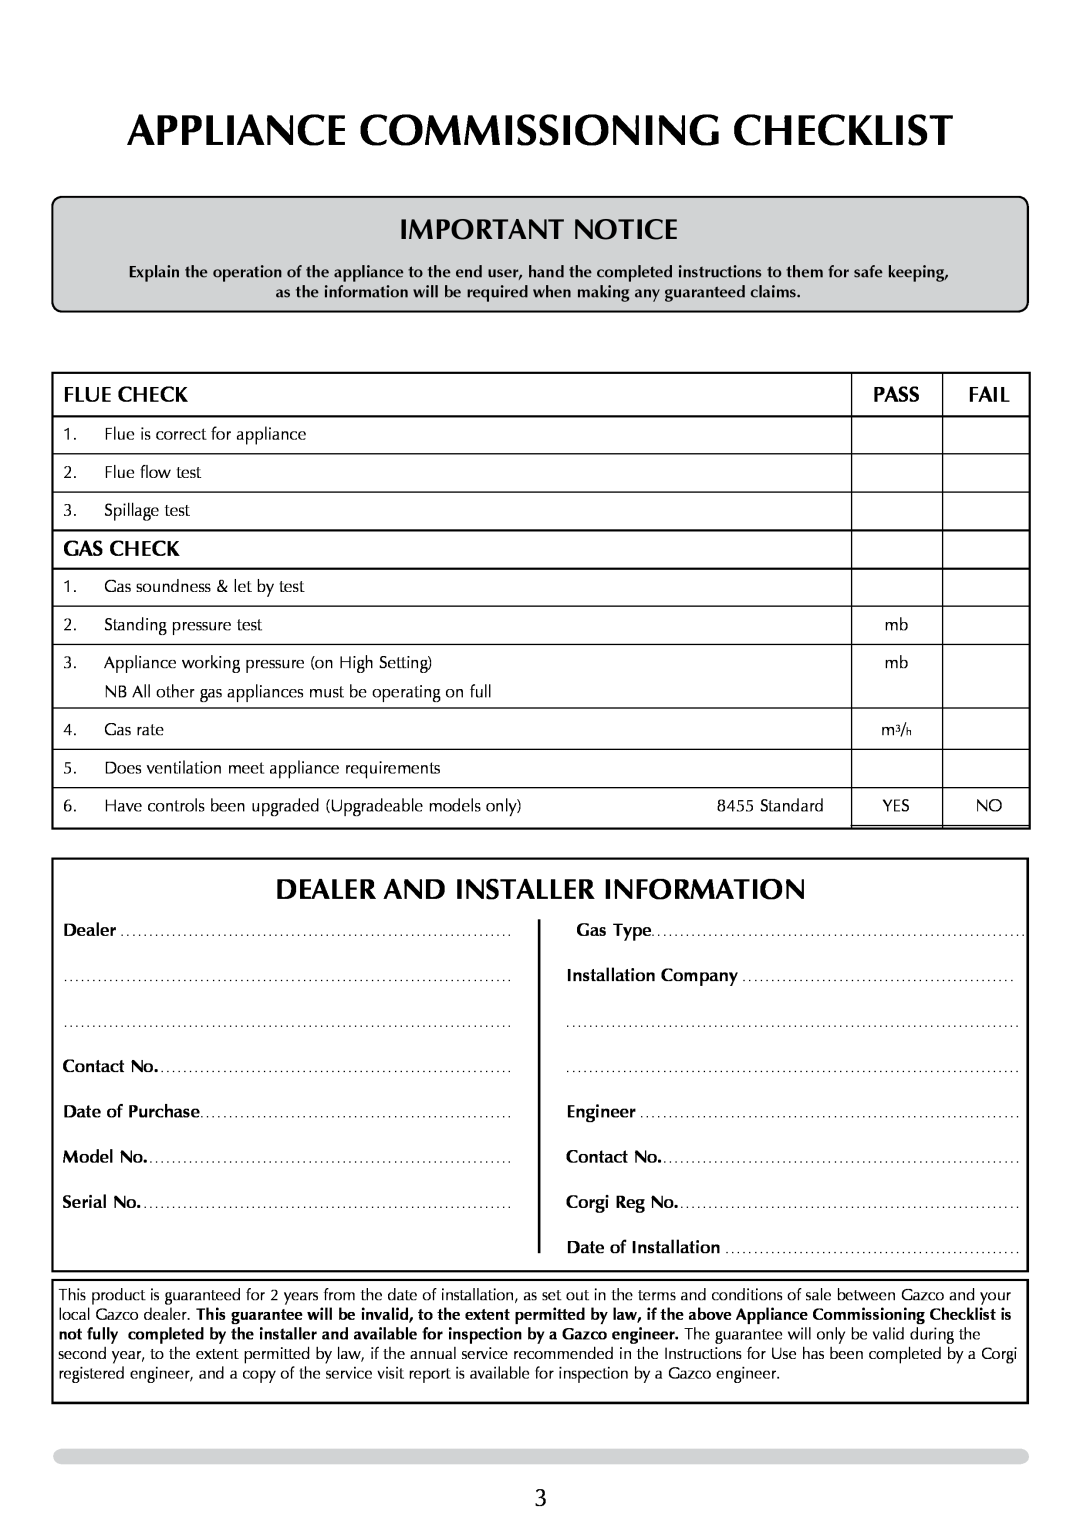 Stovax 8455 manual Appliance Commissioning Checklist, IMPORTaNT NOTICE, Dealer And Installer Information 